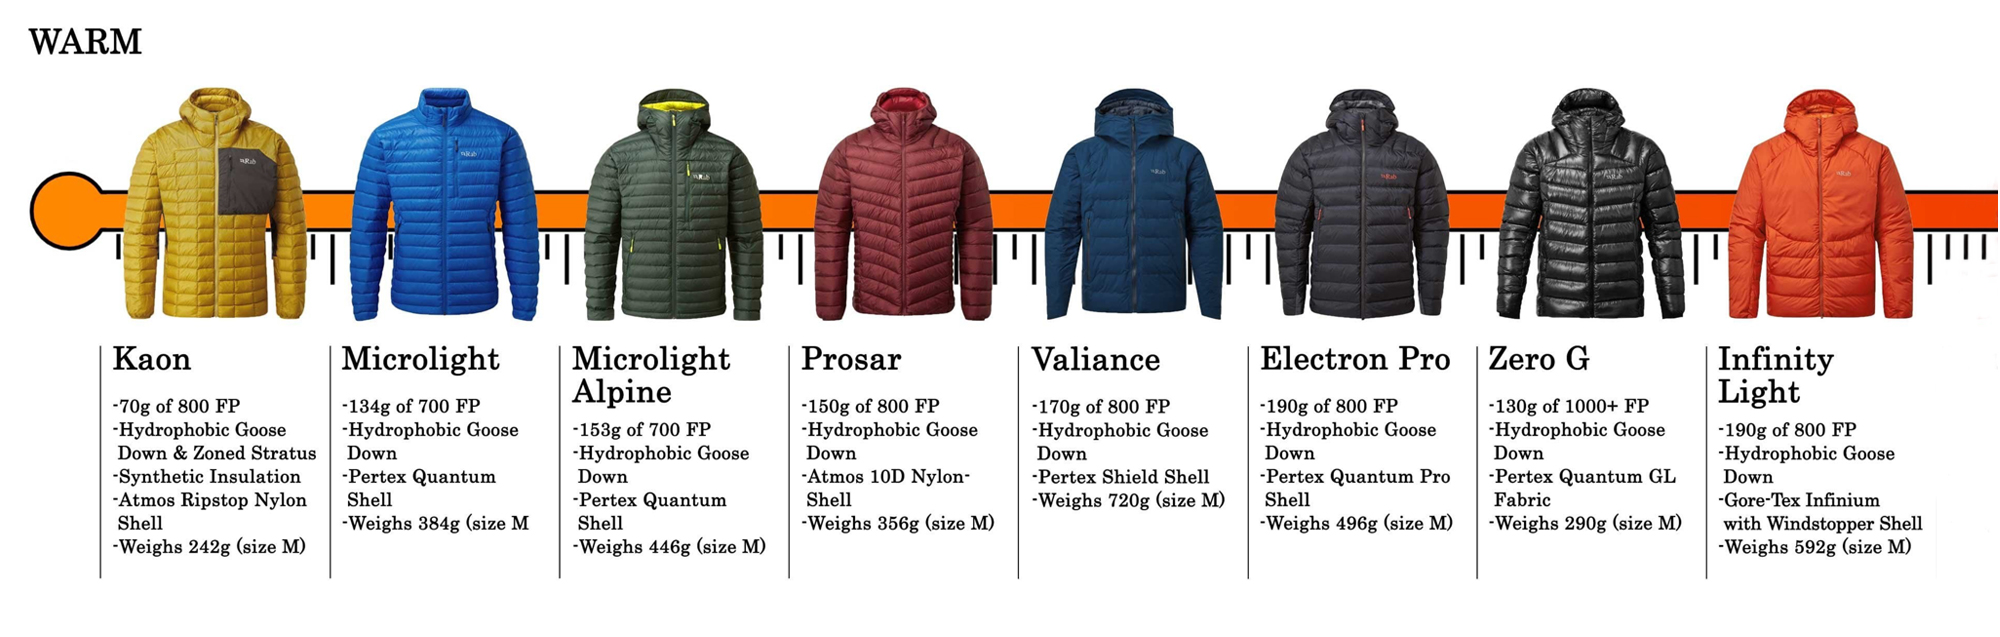 Rab Down Jacket Warmth Guide - Ultralight Outdoor Gear